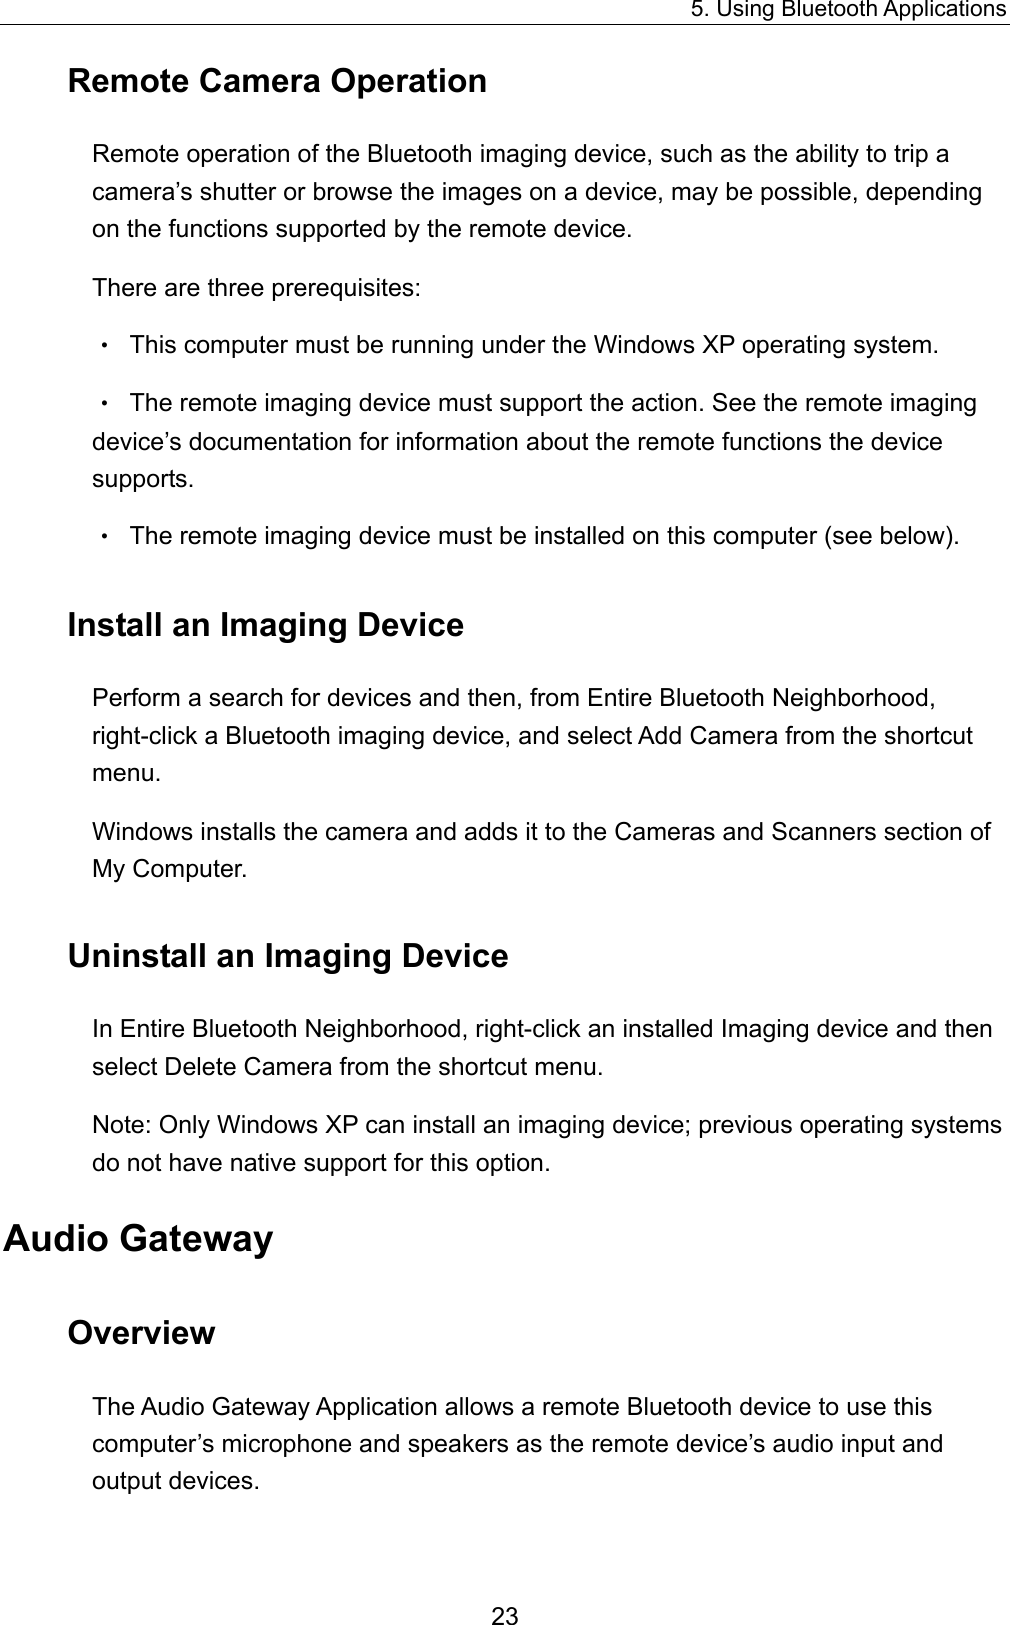 5. Using Bluetooth Applications 23 Remote Camera Operation Remote operation of the Bluetooth imaging device, such as the ability to trip a camera’s shutter or browse the images on a device, may be possible, depending on the functions supported by the remote device. There are three prerequisites: •  This computer must be running under the Windows XP operating system. •  The remote imaging device must support the action. See the remote imaging device’s documentation for information about the remote functions the device supports. •  The remote imaging device must be installed on this computer (see below). Install an Imaging Device Perform a search for devices and then, from Entire Bluetooth Neighborhood, right-click a Bluetooth imaging device, and select Add Camera from the shortcut menu. Windows installs the camera and adds it to the Cameras and Scanners section of My Computer. Uninstall an Imaging Device In Entire Bluetooth Neighborhood, right-click an installed Imaging device and then select Delete Camera from the shortcut menu. Note: Only Windows XP can install an imaging device; previous operating systems do not have native support for this option. Audio Gateway Overview The Audio Gateway Application allows a remote Bluetooth device to use this computer’s microphone and speakers as the remote device’s audio input and output devices. 